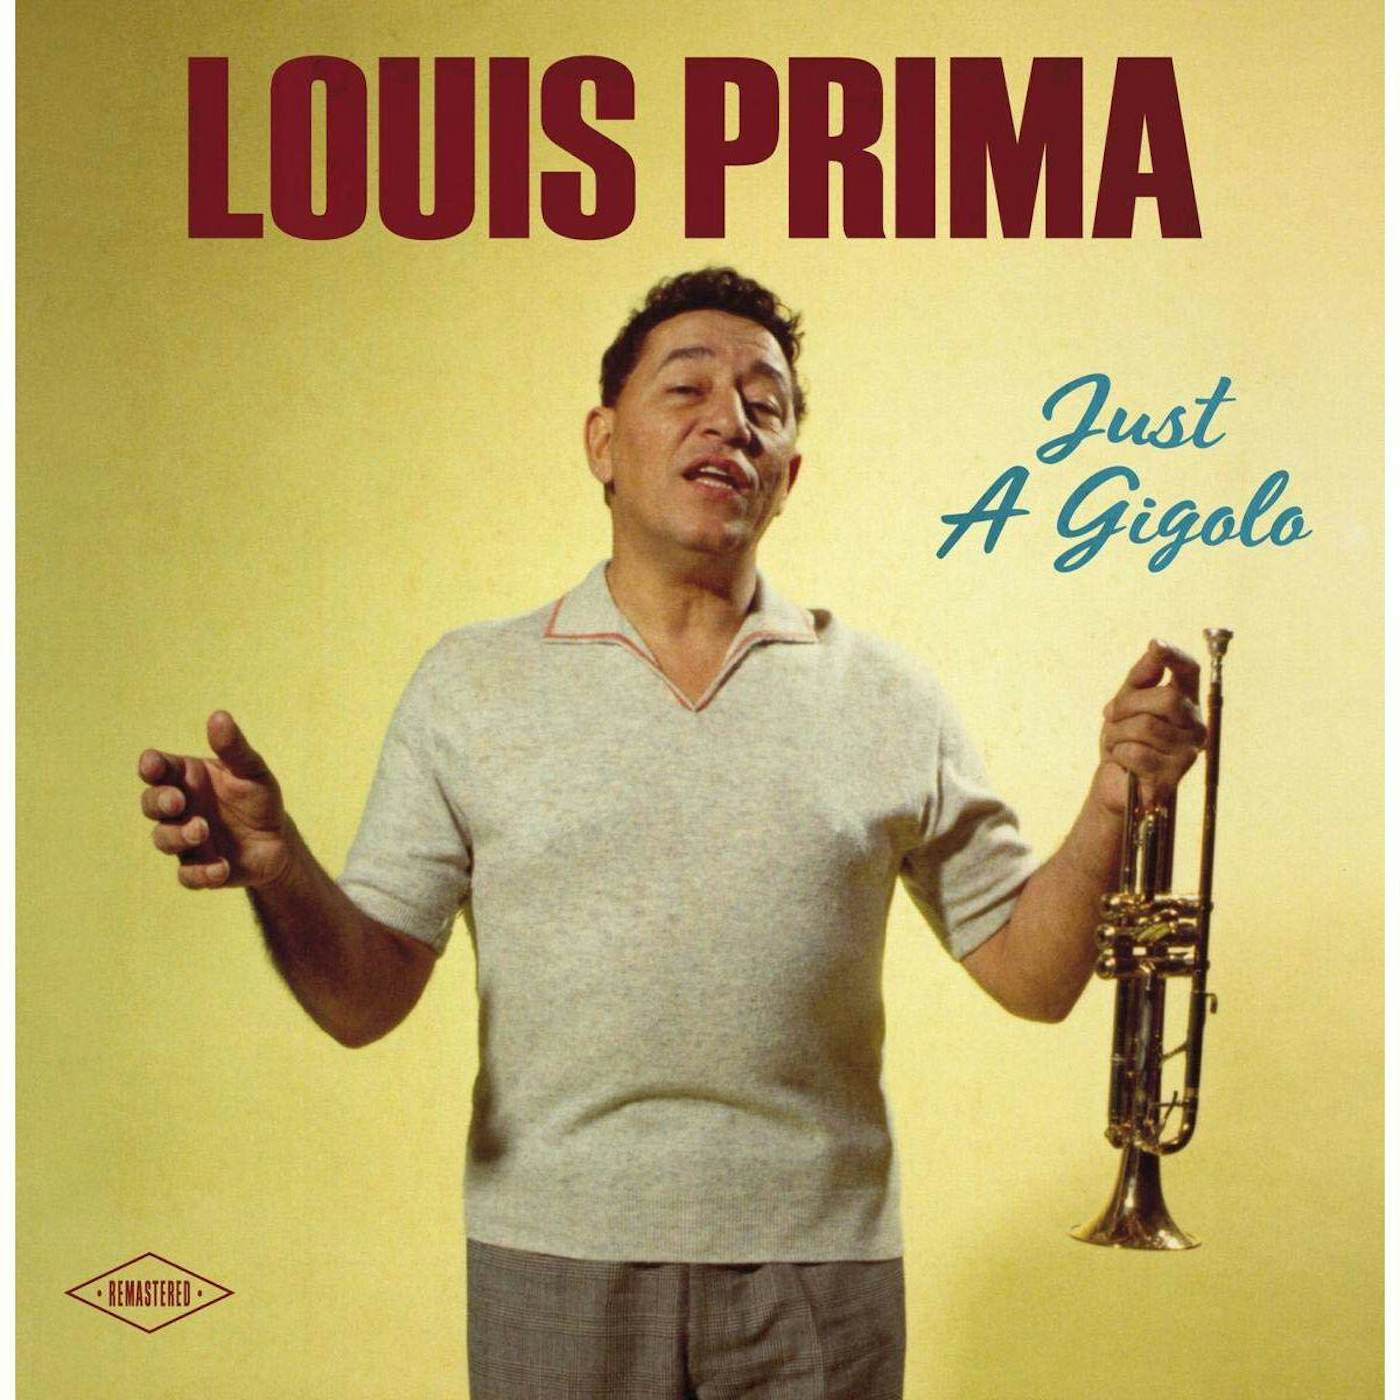 Louis Prima PLAY IT PRETTY FOR THE PEOPLE CD